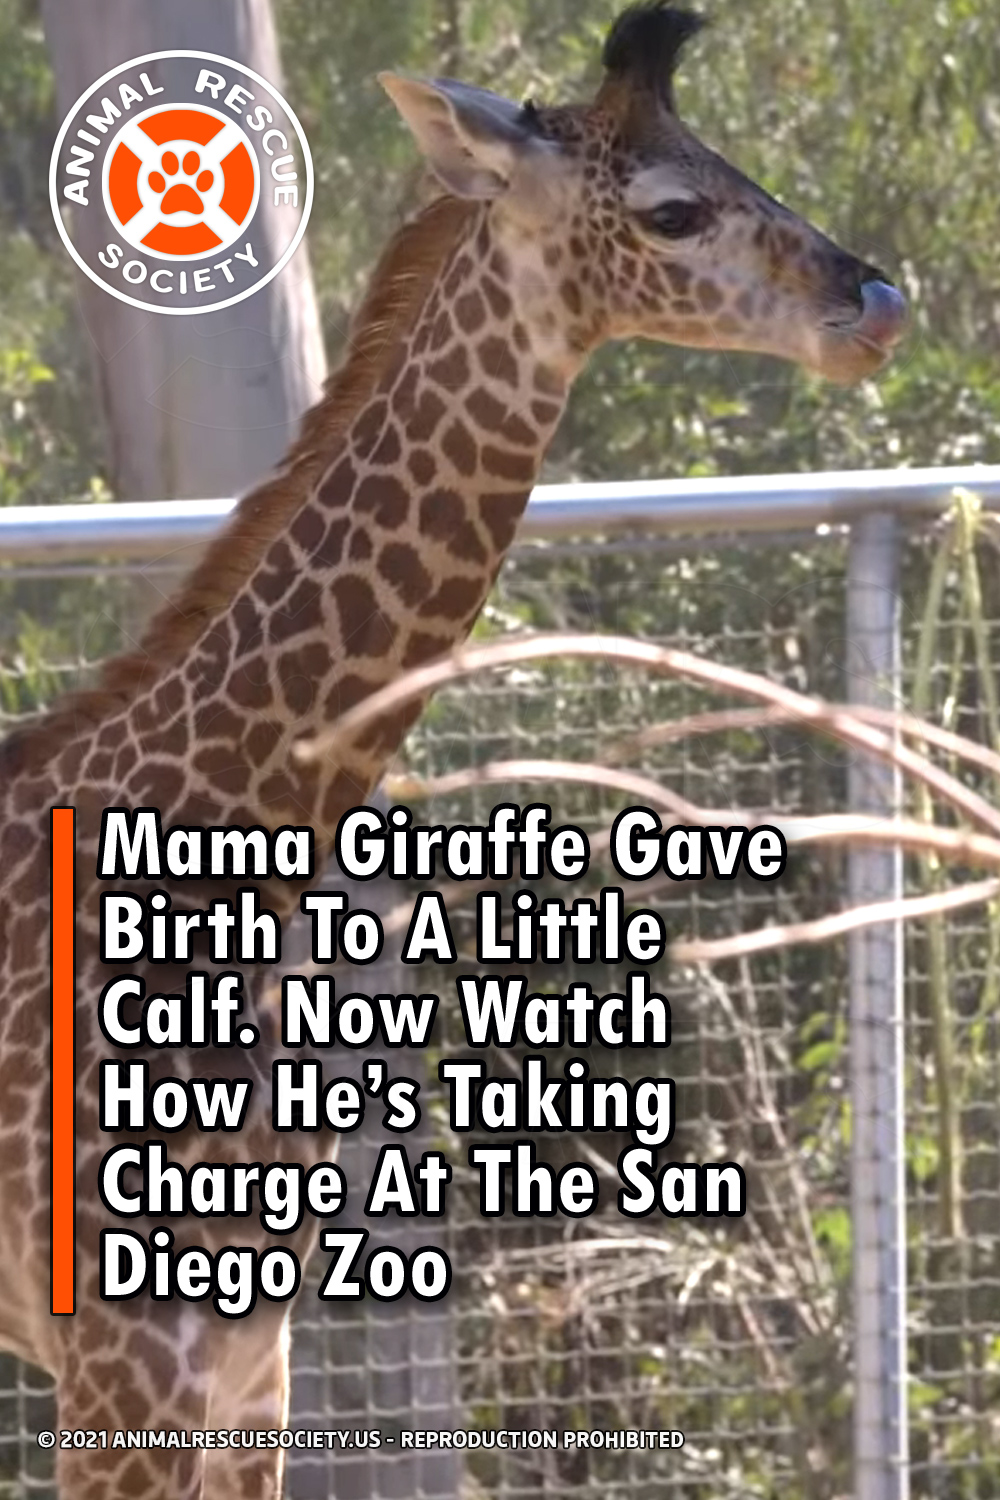 Mama Giraffe Gave Birth To A Little Calf. Now Watch How He’s Taking Charge At The San Diego Zoo